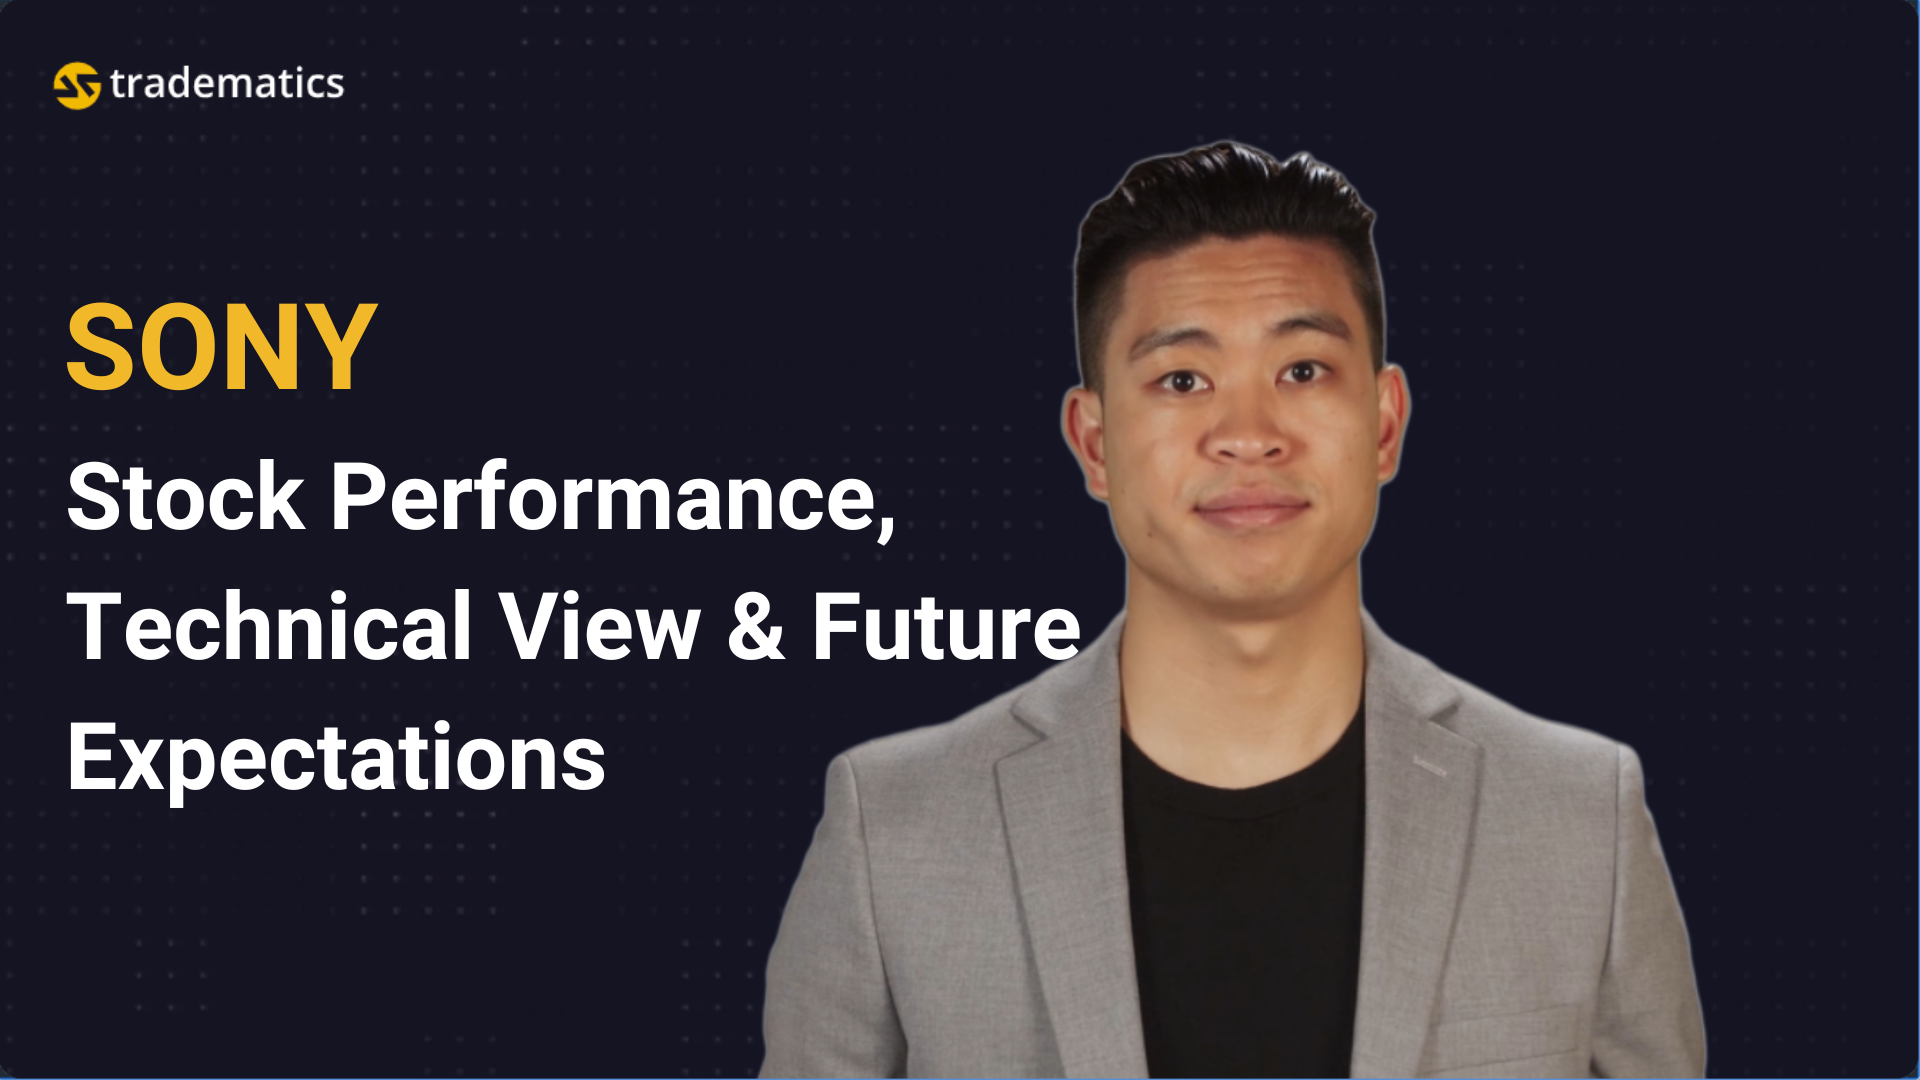 Tradematics | #7 SONY | Stock Performance, Technical View & Future Expectations